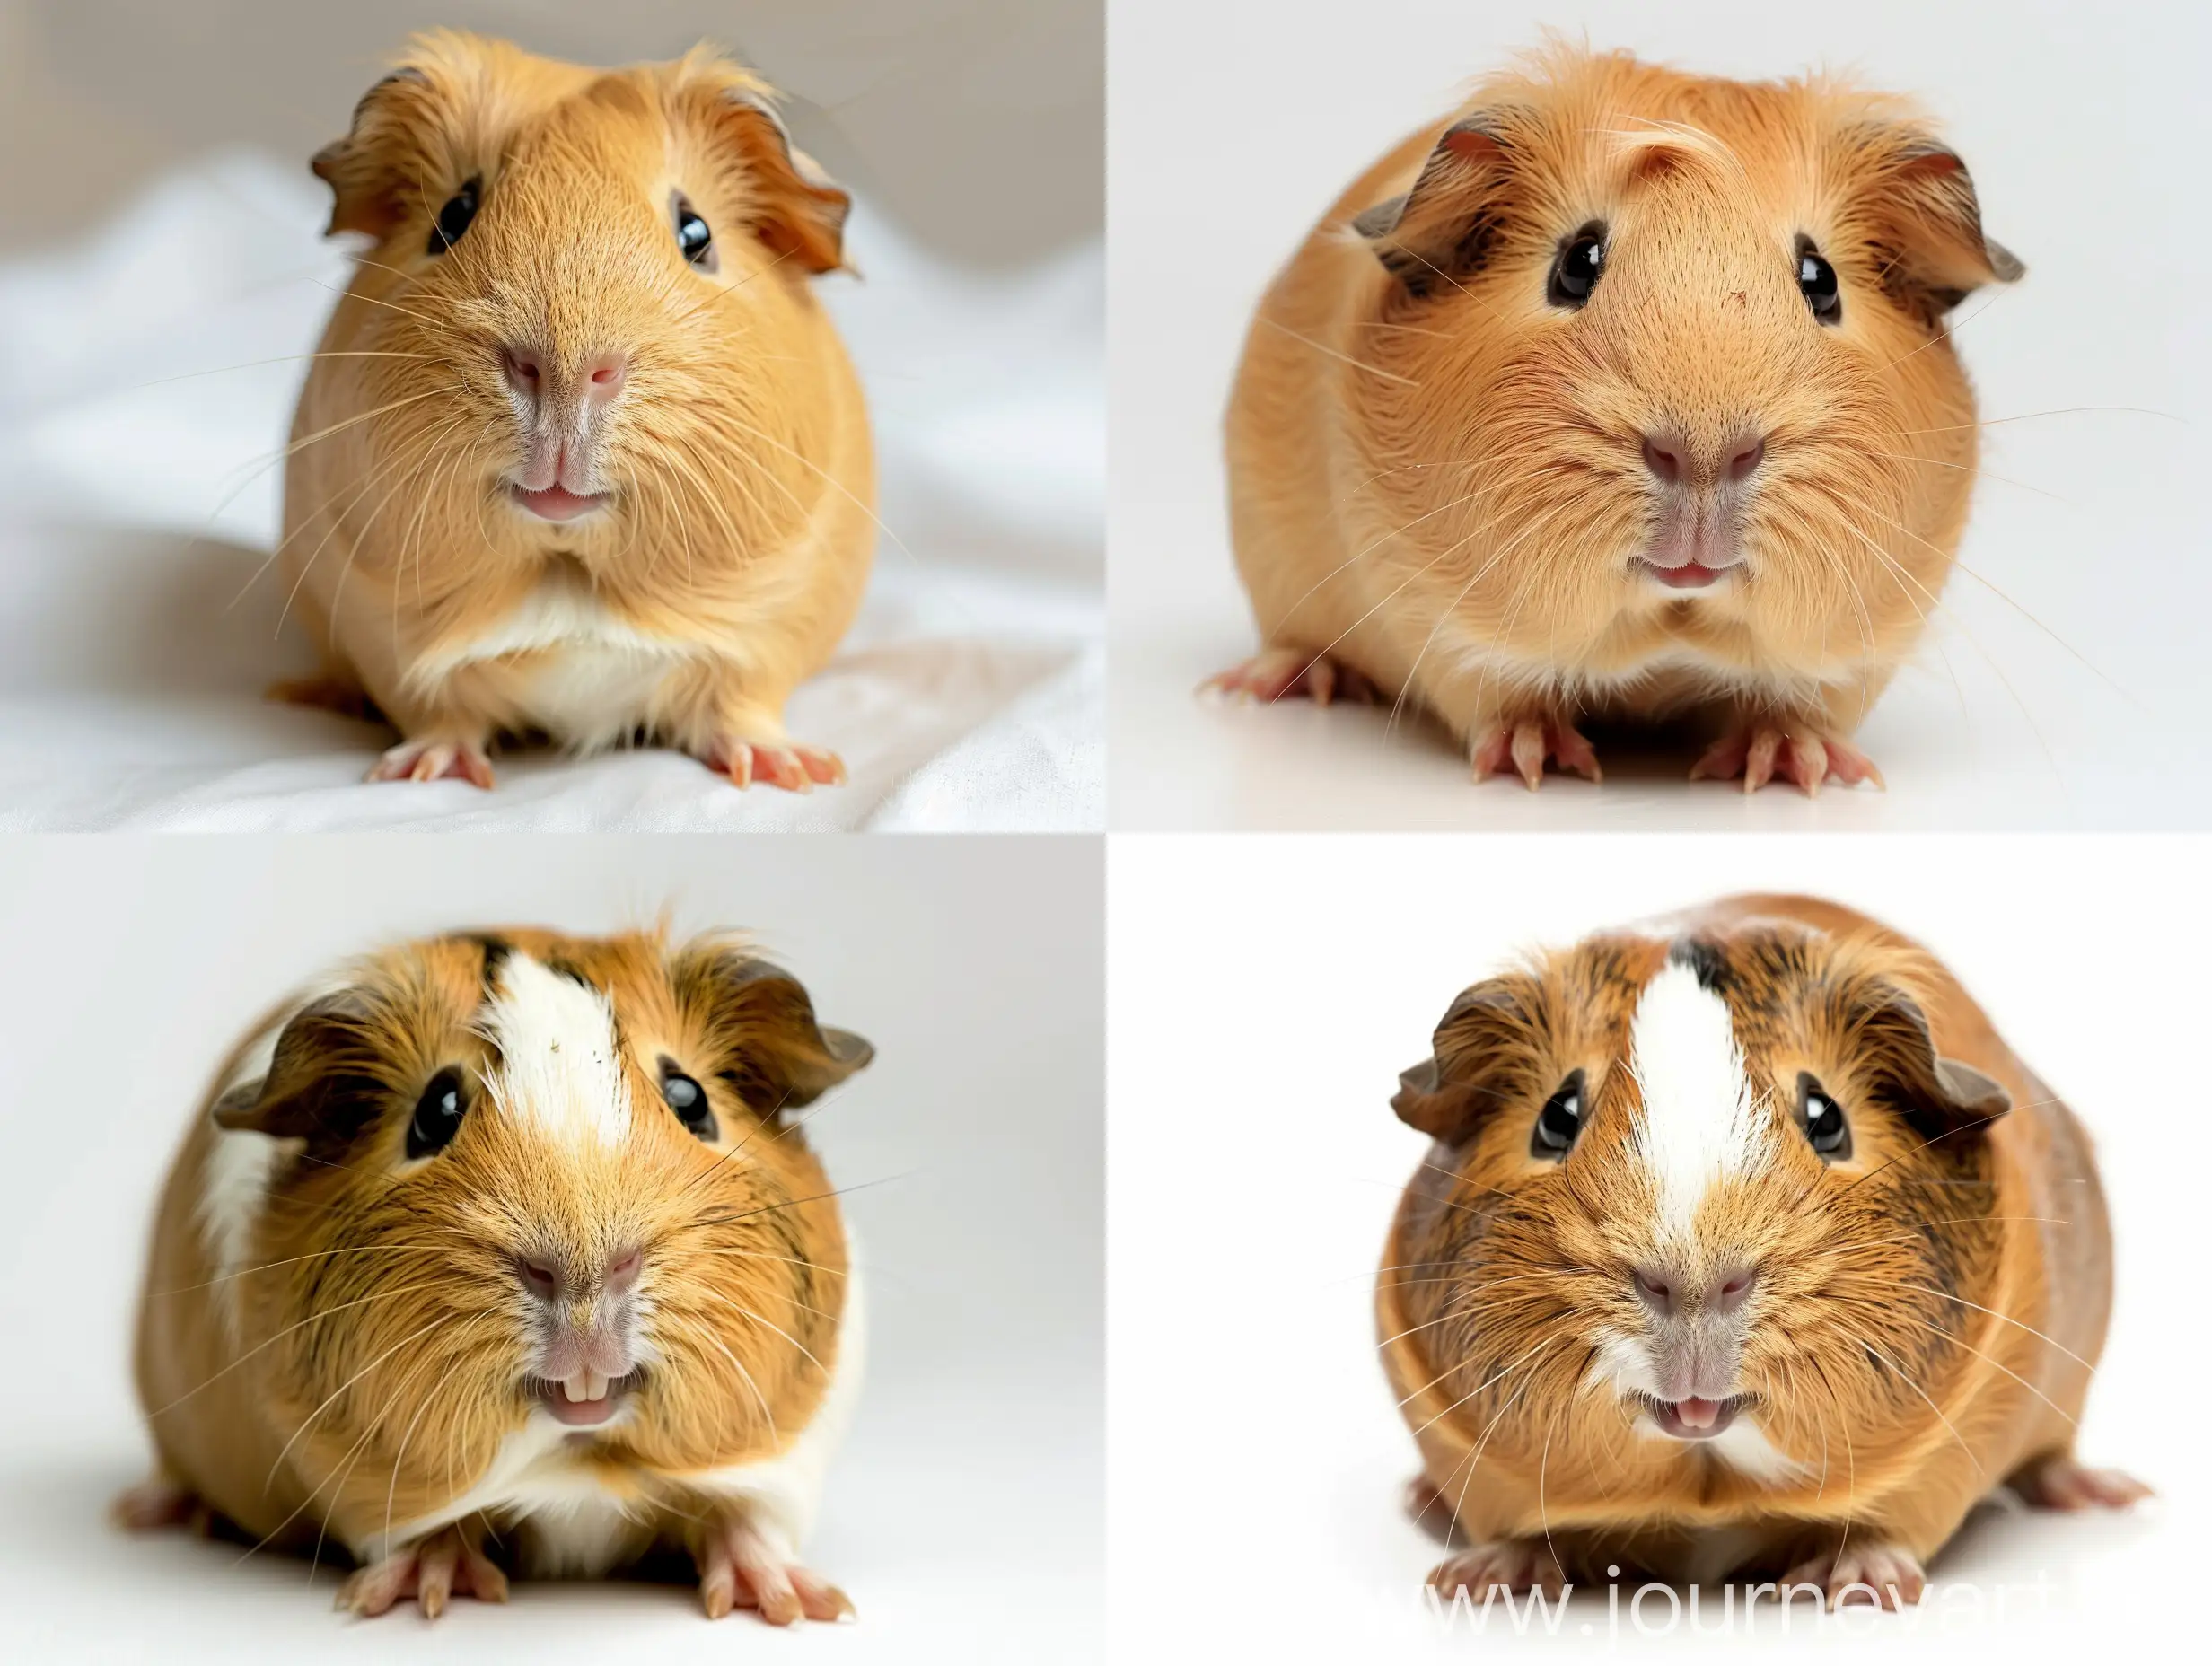 Funny guinea pig smiling on white background